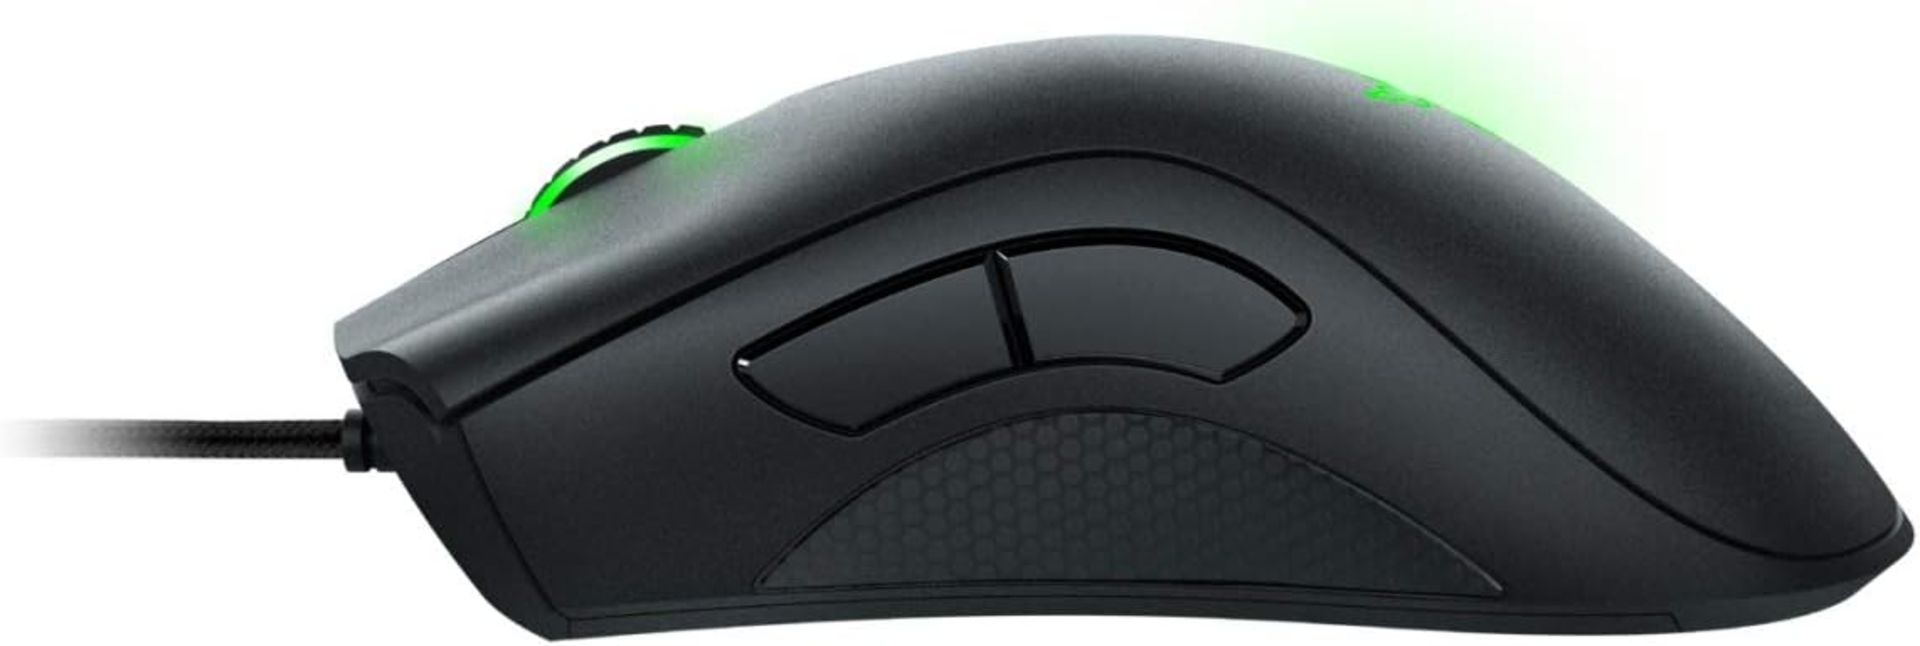 4x BRAND NEW FACTORY SEALED RAZER Deathadder Essential Gaming Mouse. RRP £22.99 EACH. The Razer - Image 5 of 5